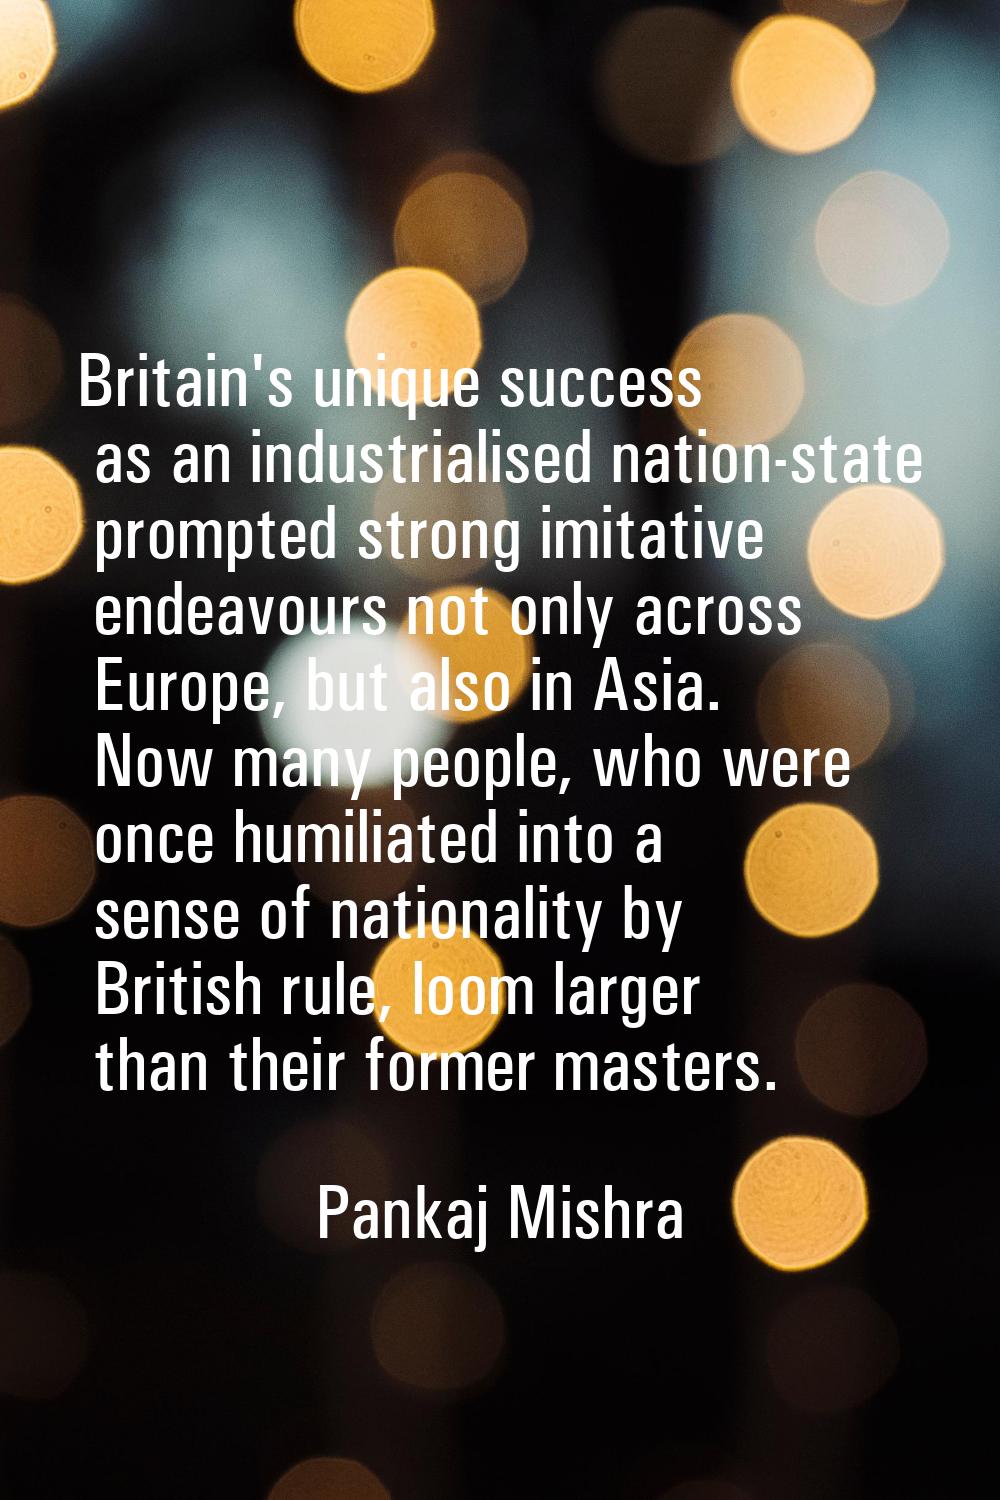 Britain's unique success as an industrialised nation-state prompted strong imitative endeavours not